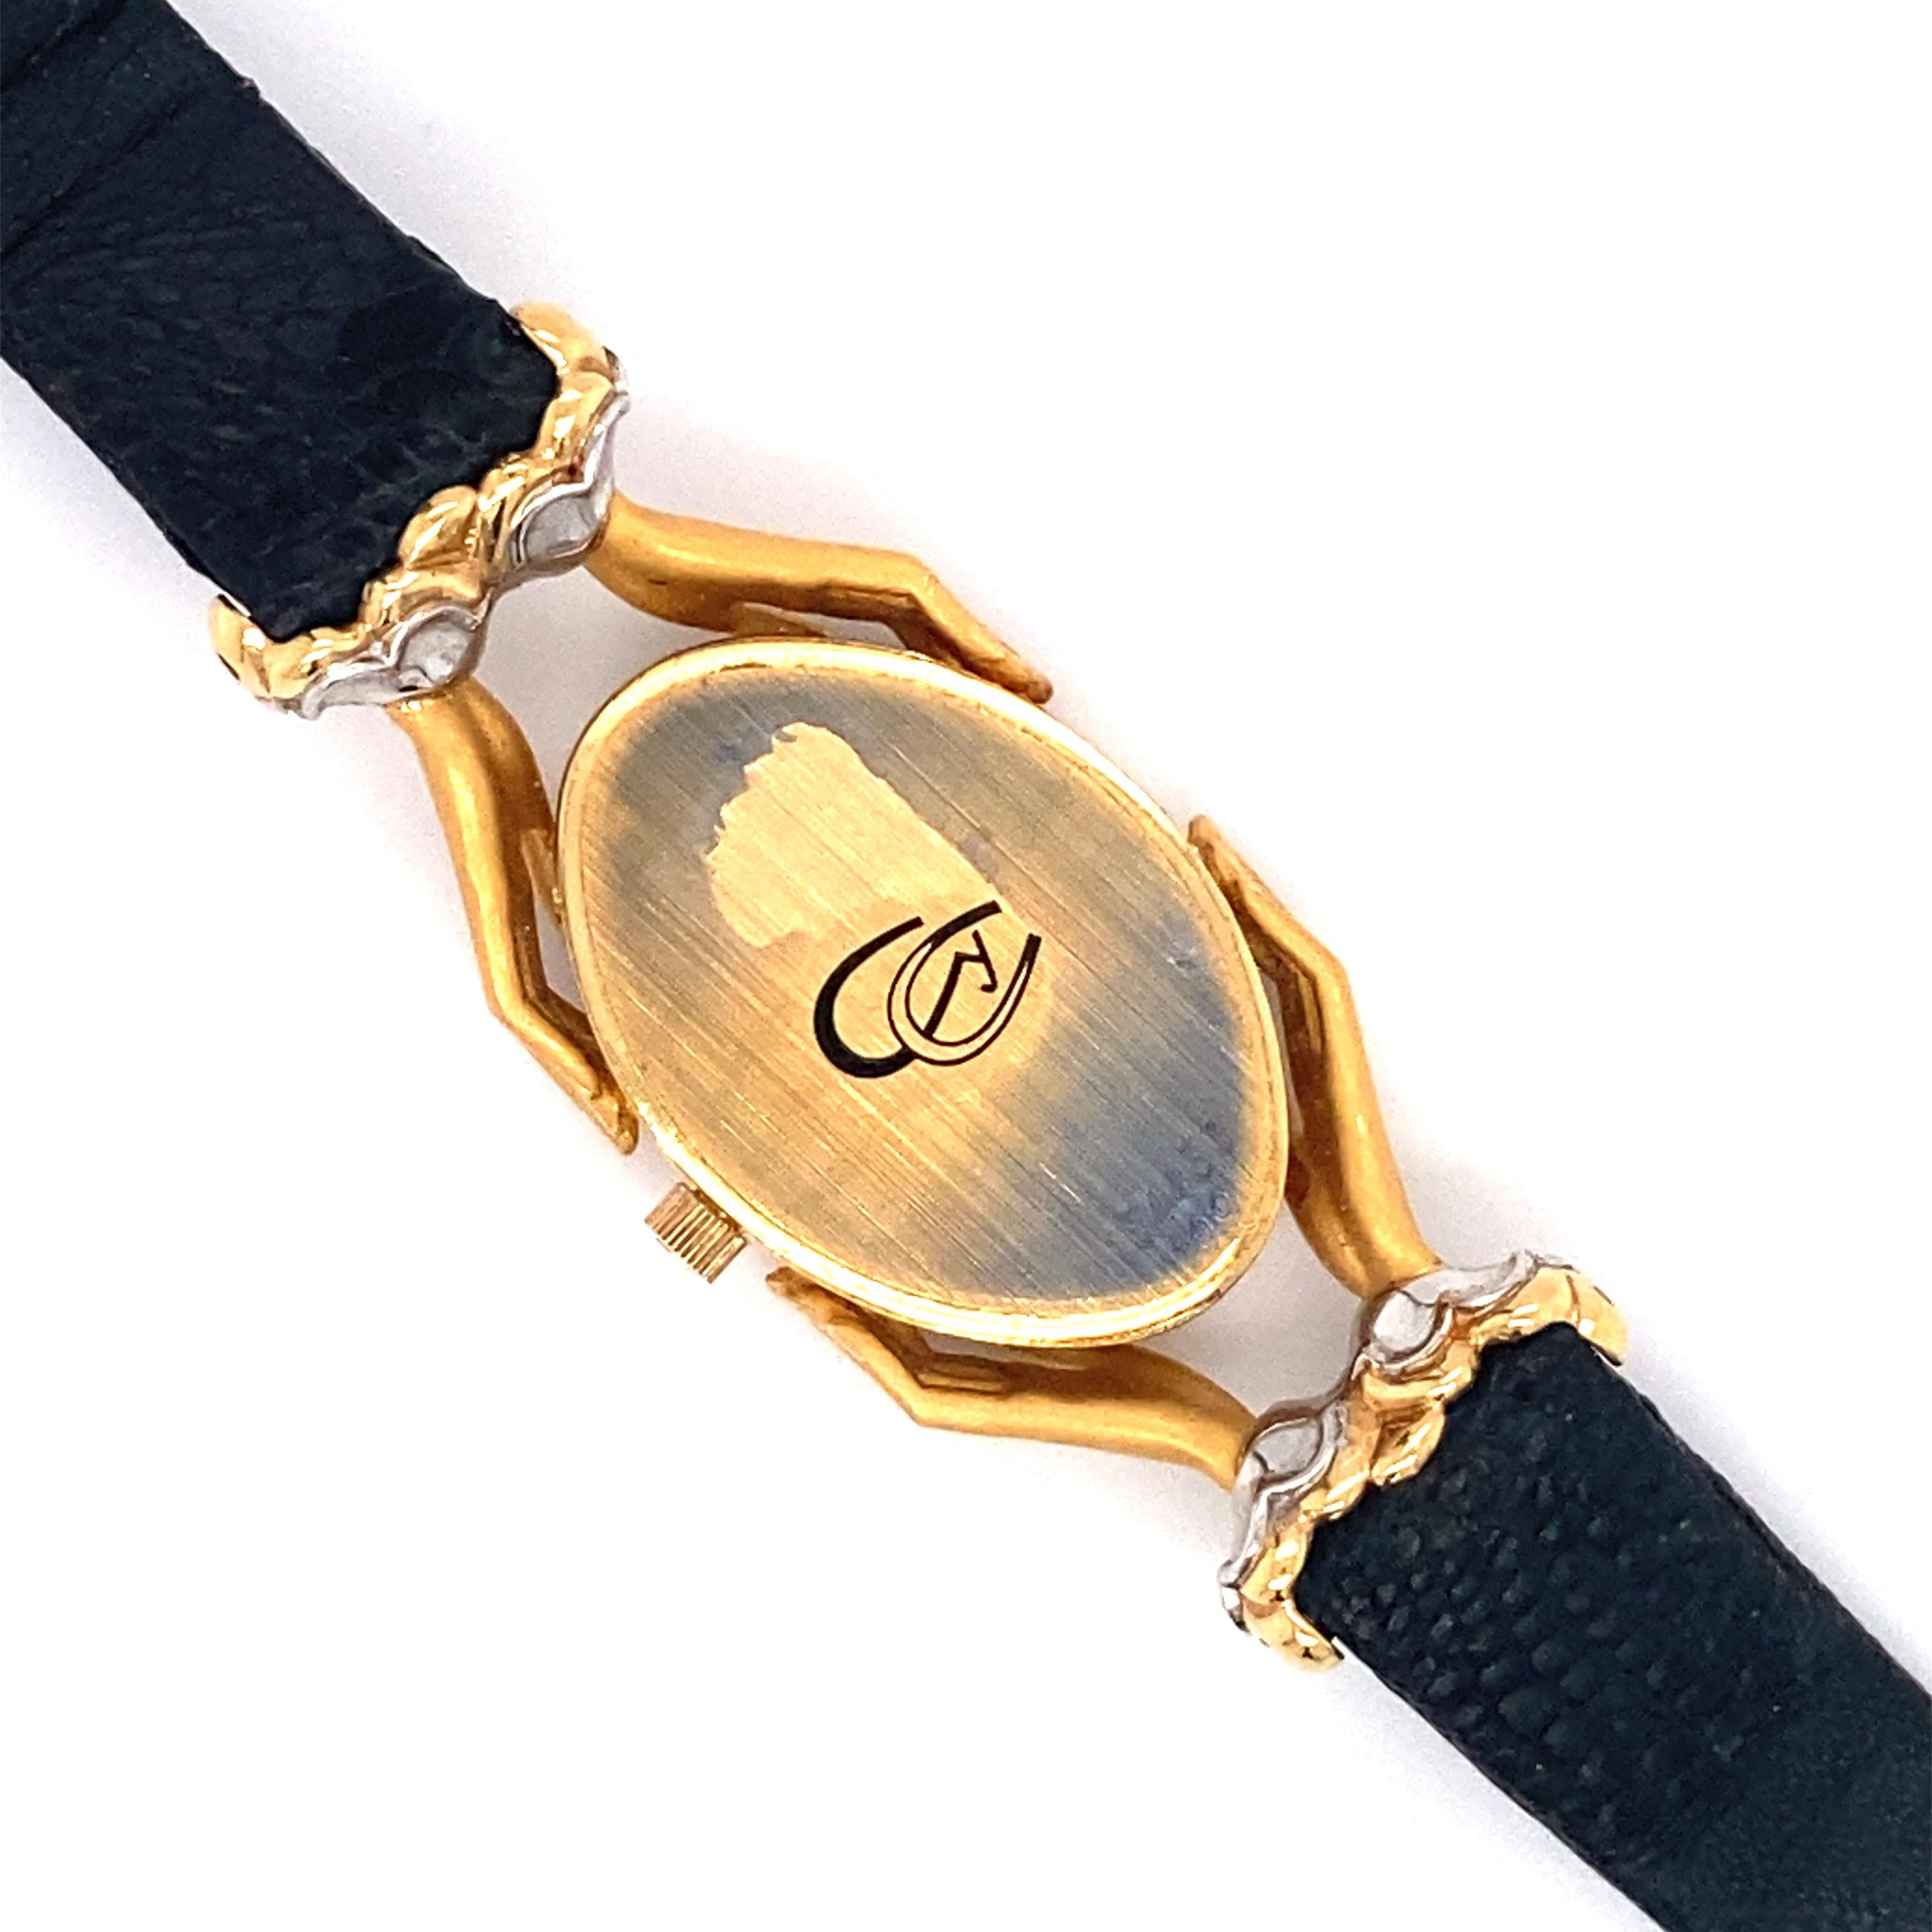 Circa: 1990s
Metal Type: 18 Karat Yellow and White gold

Diamond Details:
Carat: 0.10 carat total weight
Color: G
Clarity: VS

This wristwatch can fit up to an 8 inch wrist. 